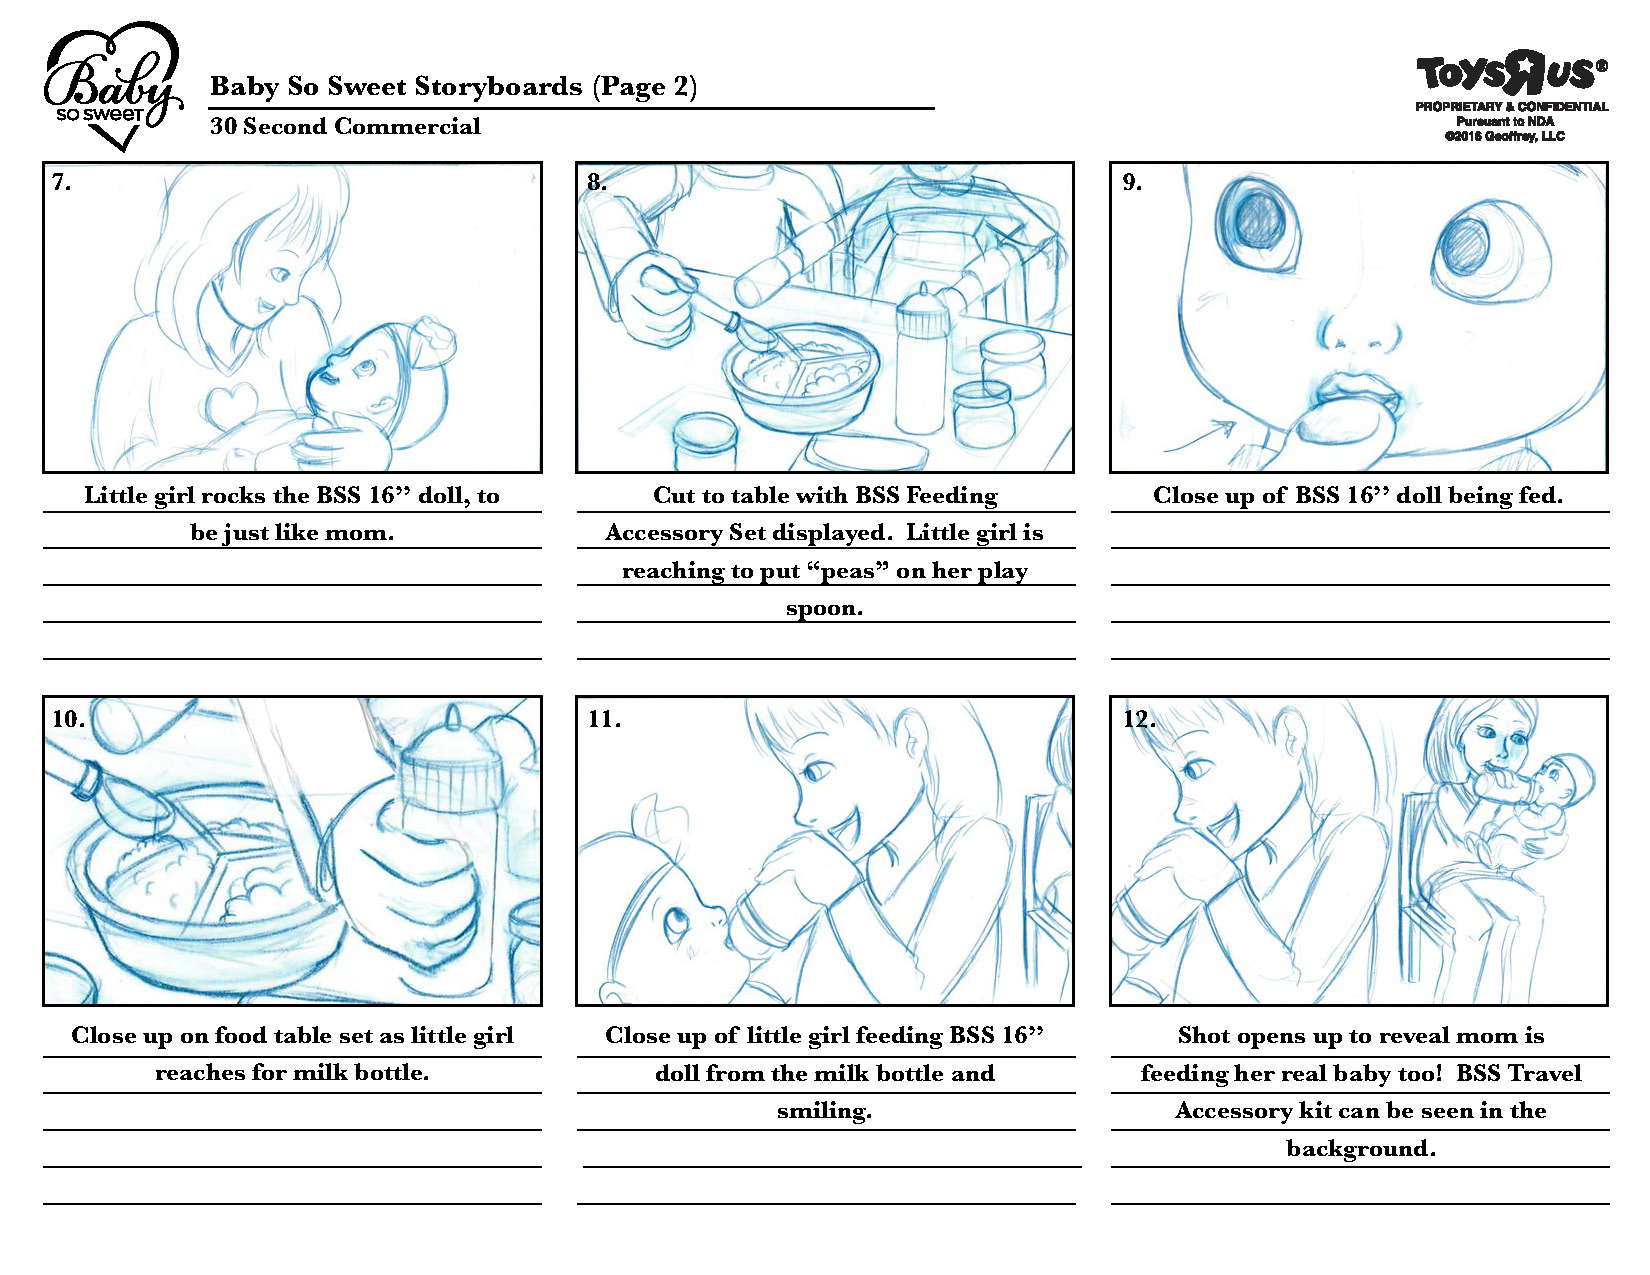 BSS_Storyboards_Page_2.jpg